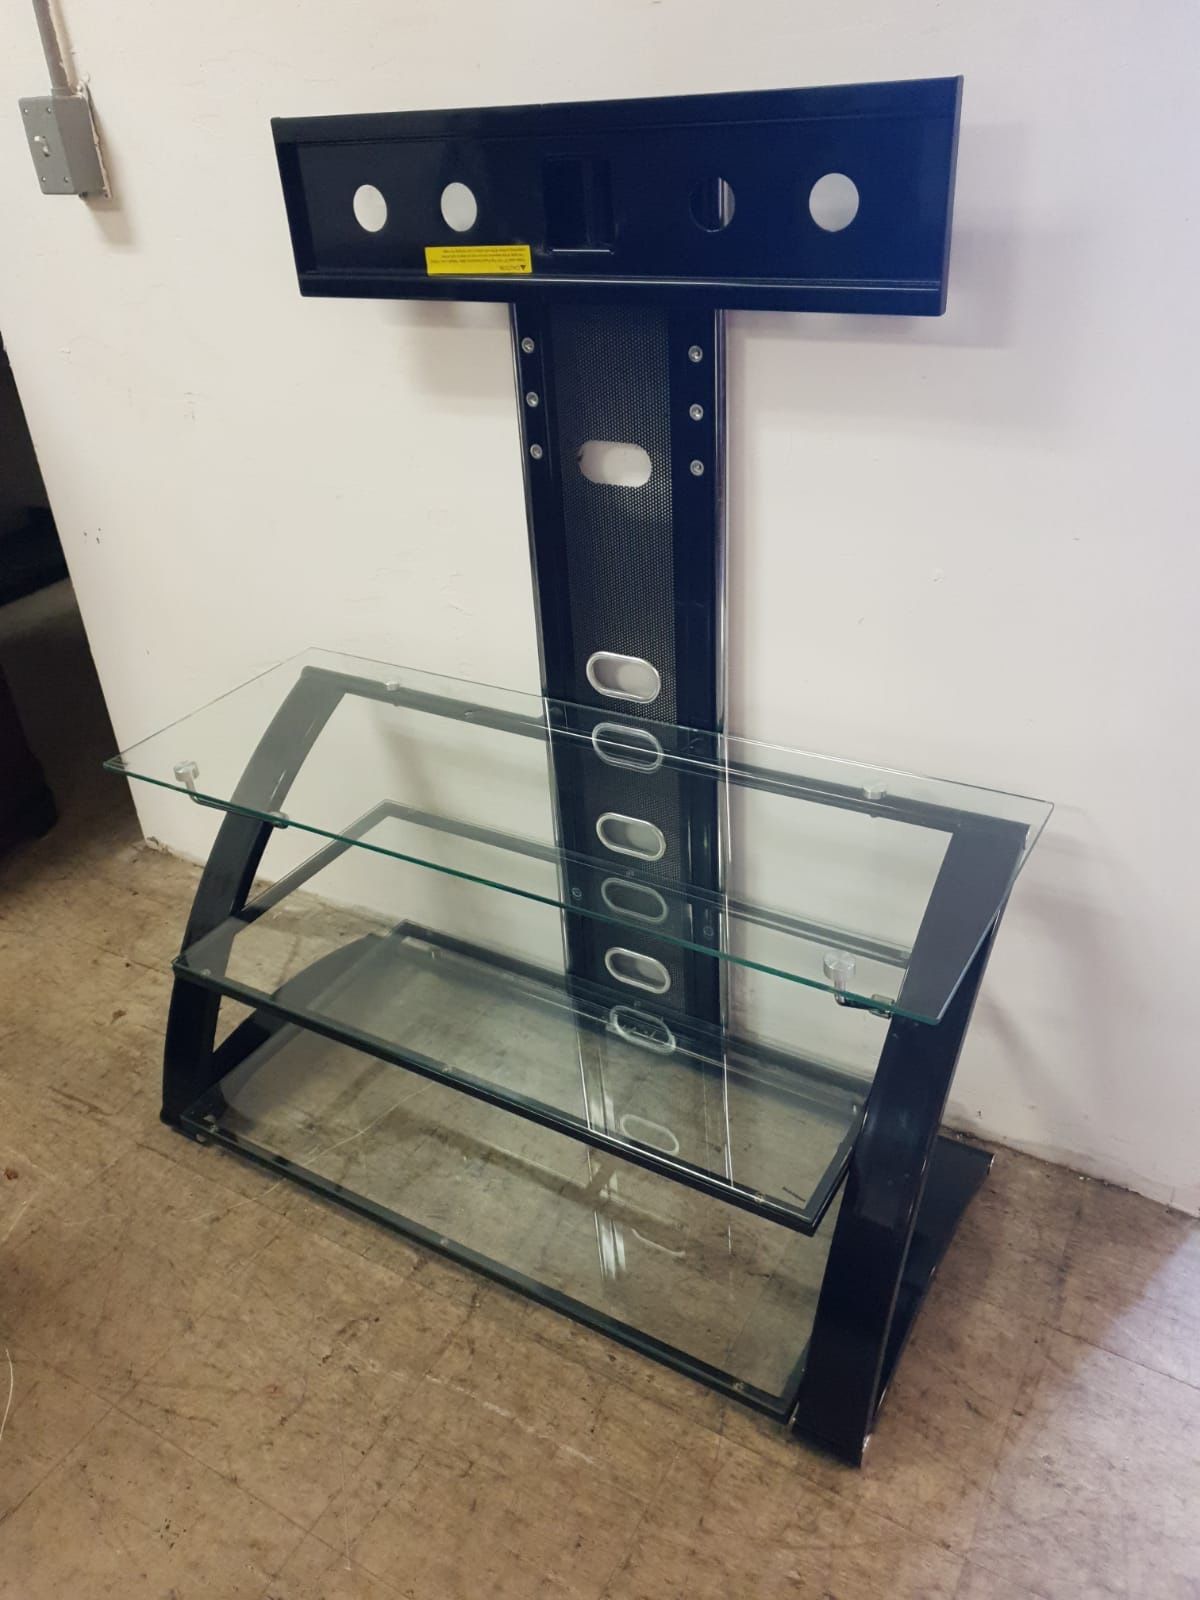 Tv stand 44inch in excellent condition